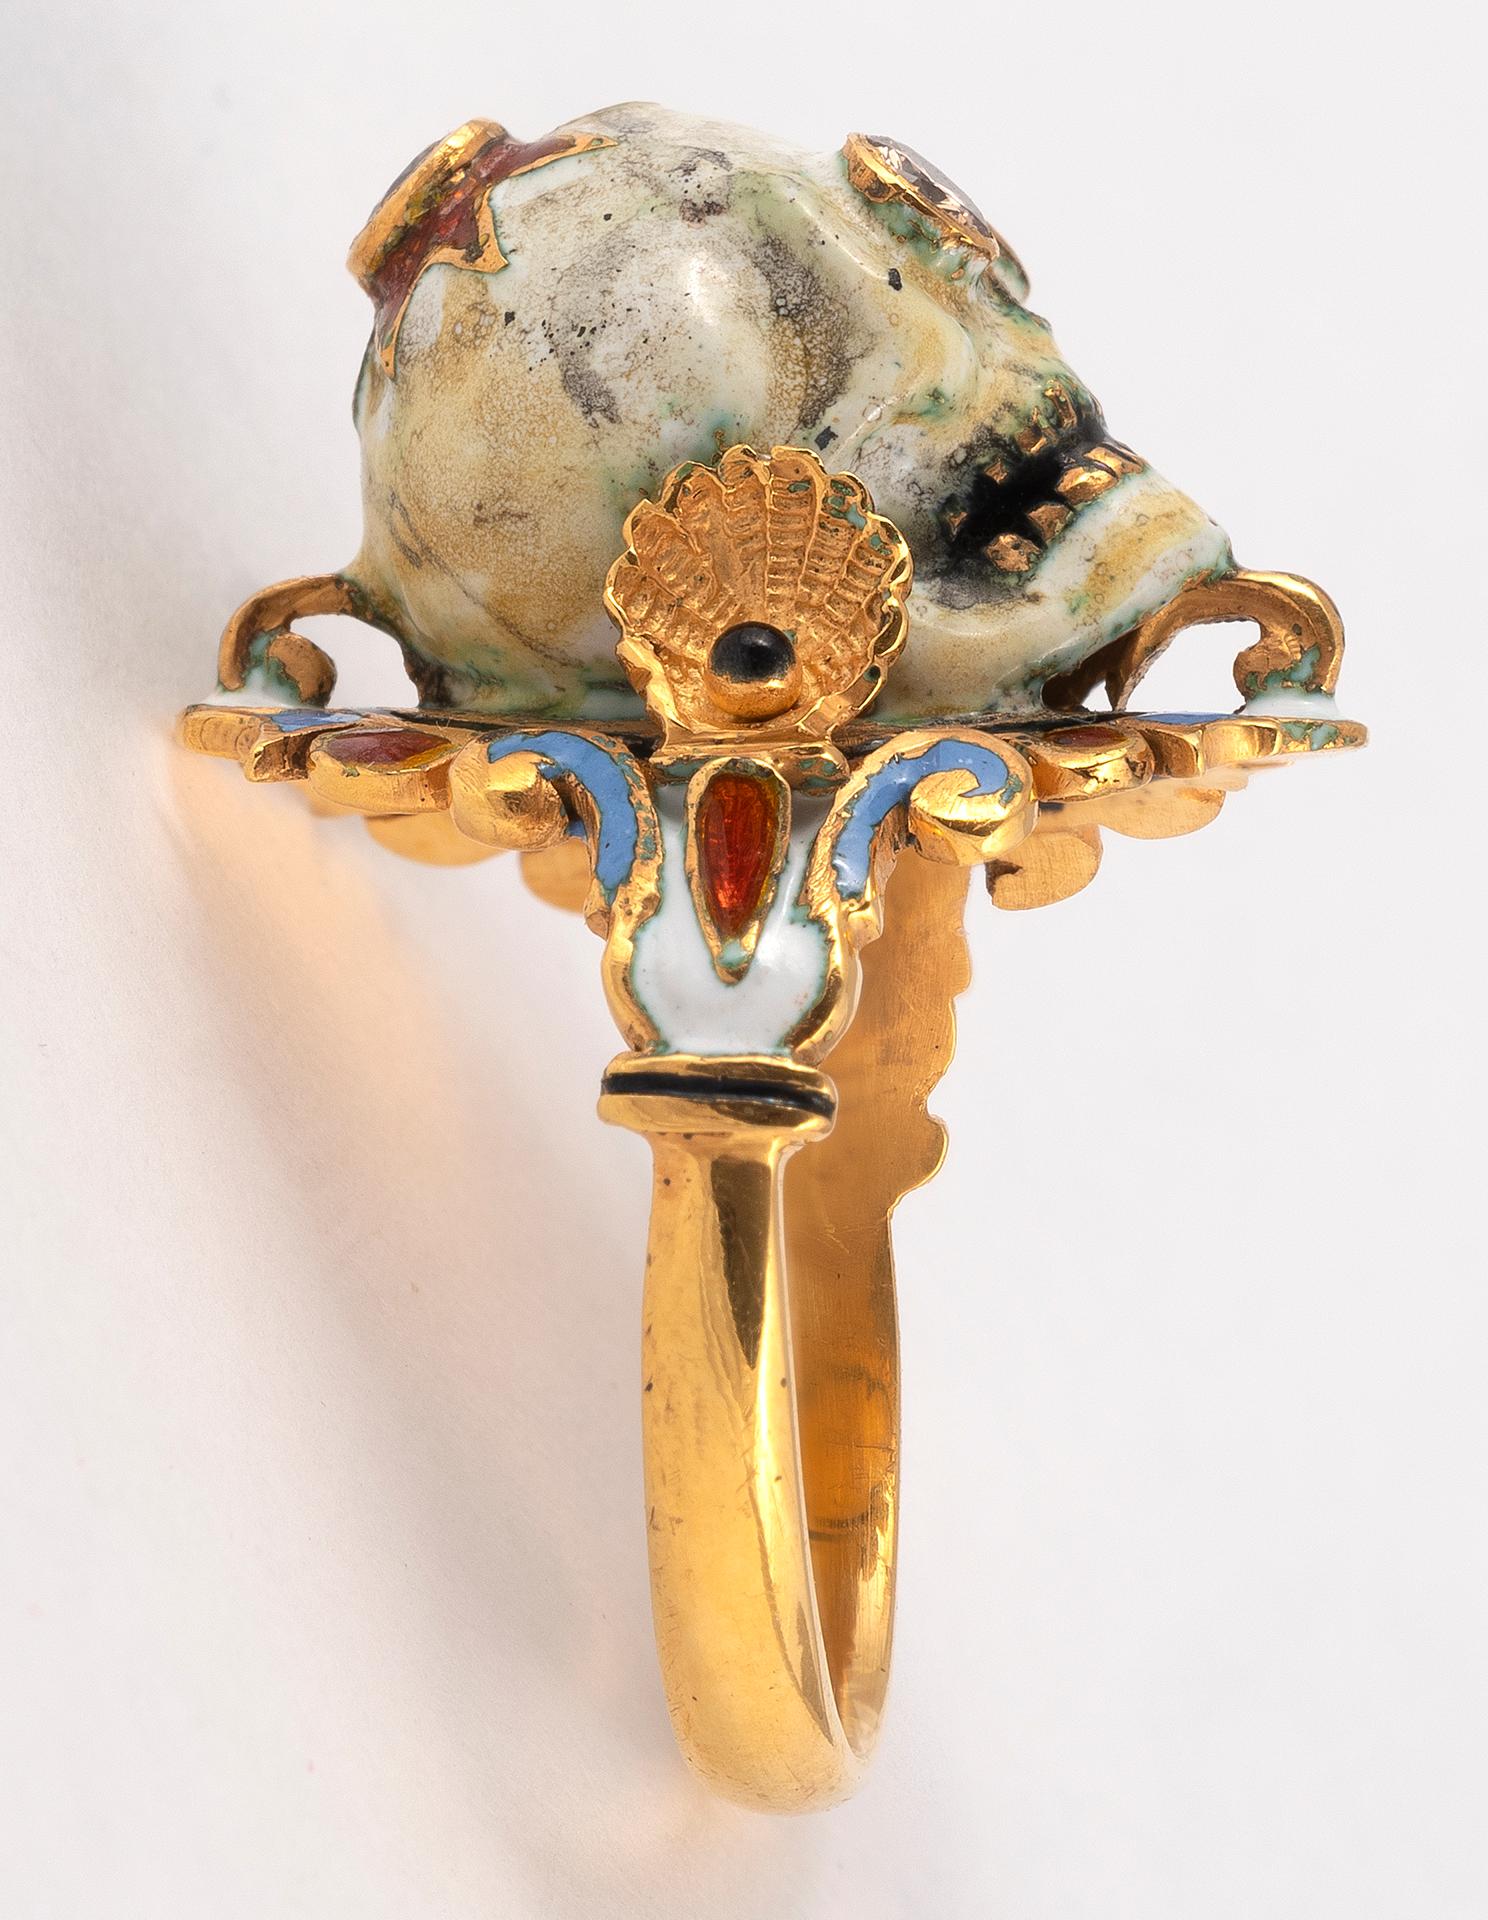 Depicting the skull with diamond eyes and shell on the side.
Size 7 1/2
Signed A. Codoganto
Weight: 11,27gr.